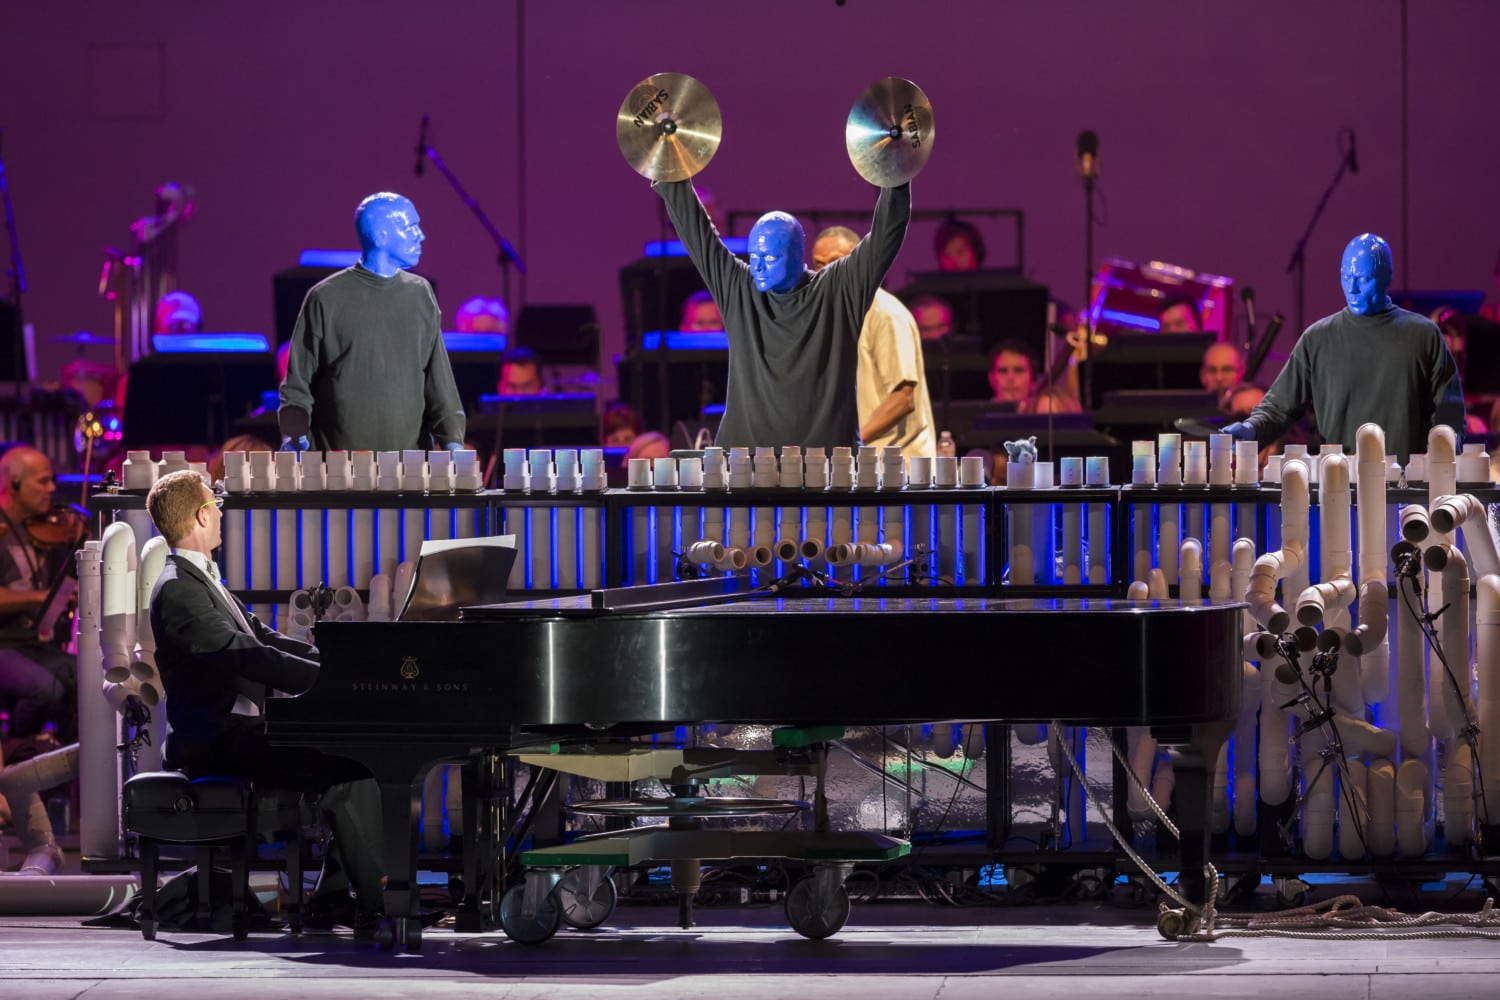 Blue Man Group Performs All New Energy-infused Show At The Hollywood Bowl